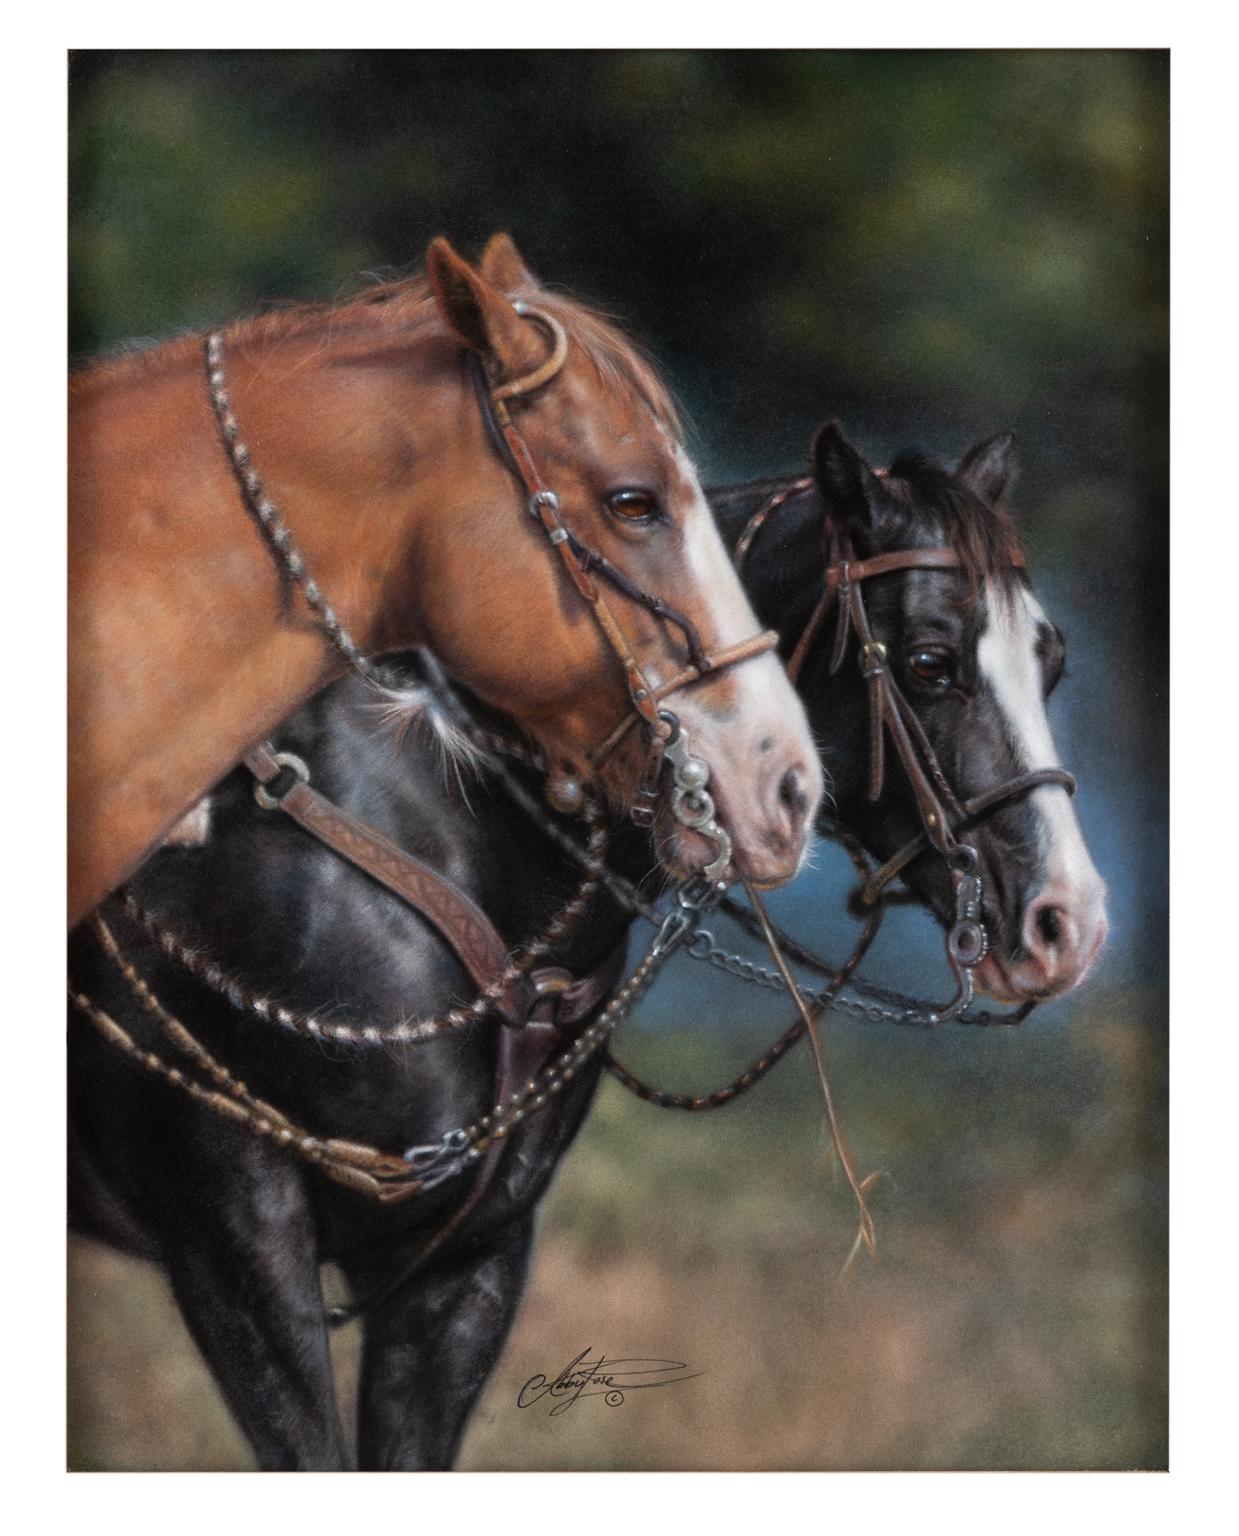 Abigail Dunnivan Animal Painting - The Buddy System - Horse Pastel Painting Equine Western Photorealism